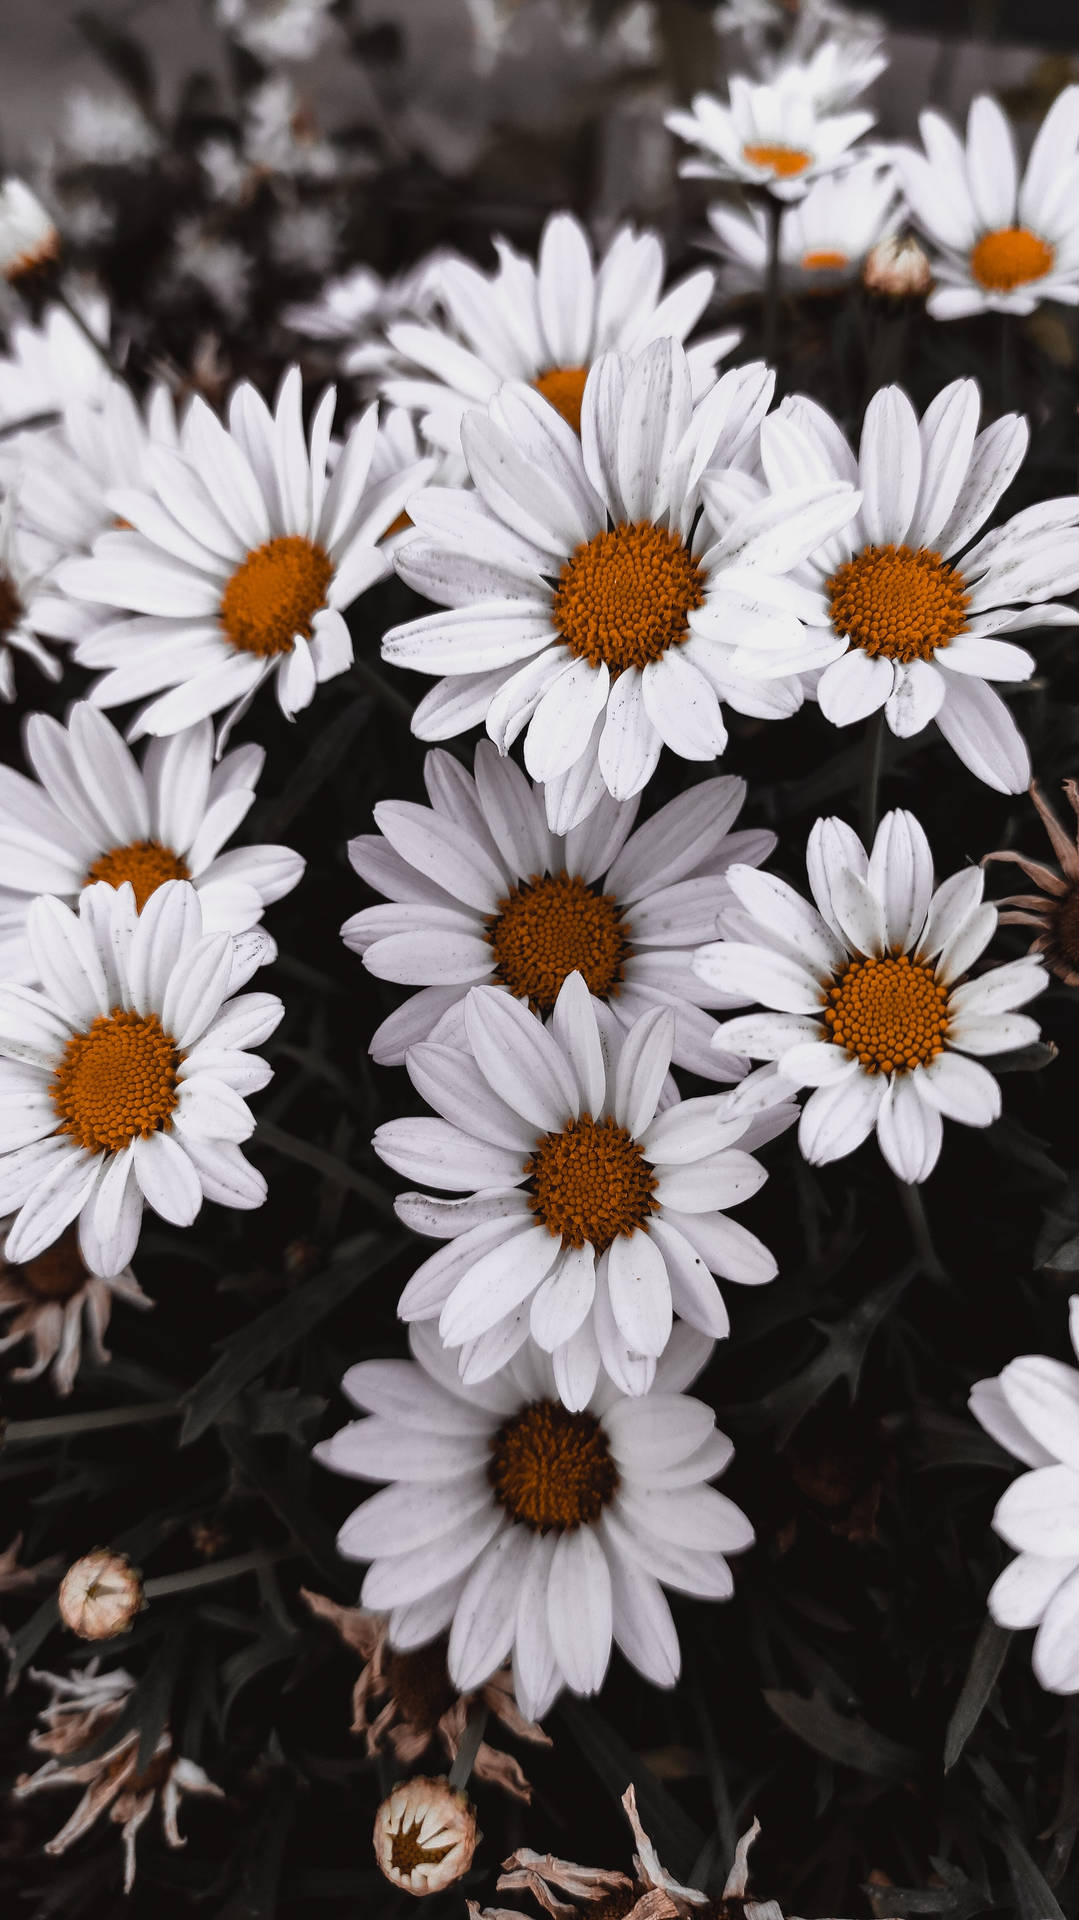 Vintage Daisy Flower Android Wallpaper